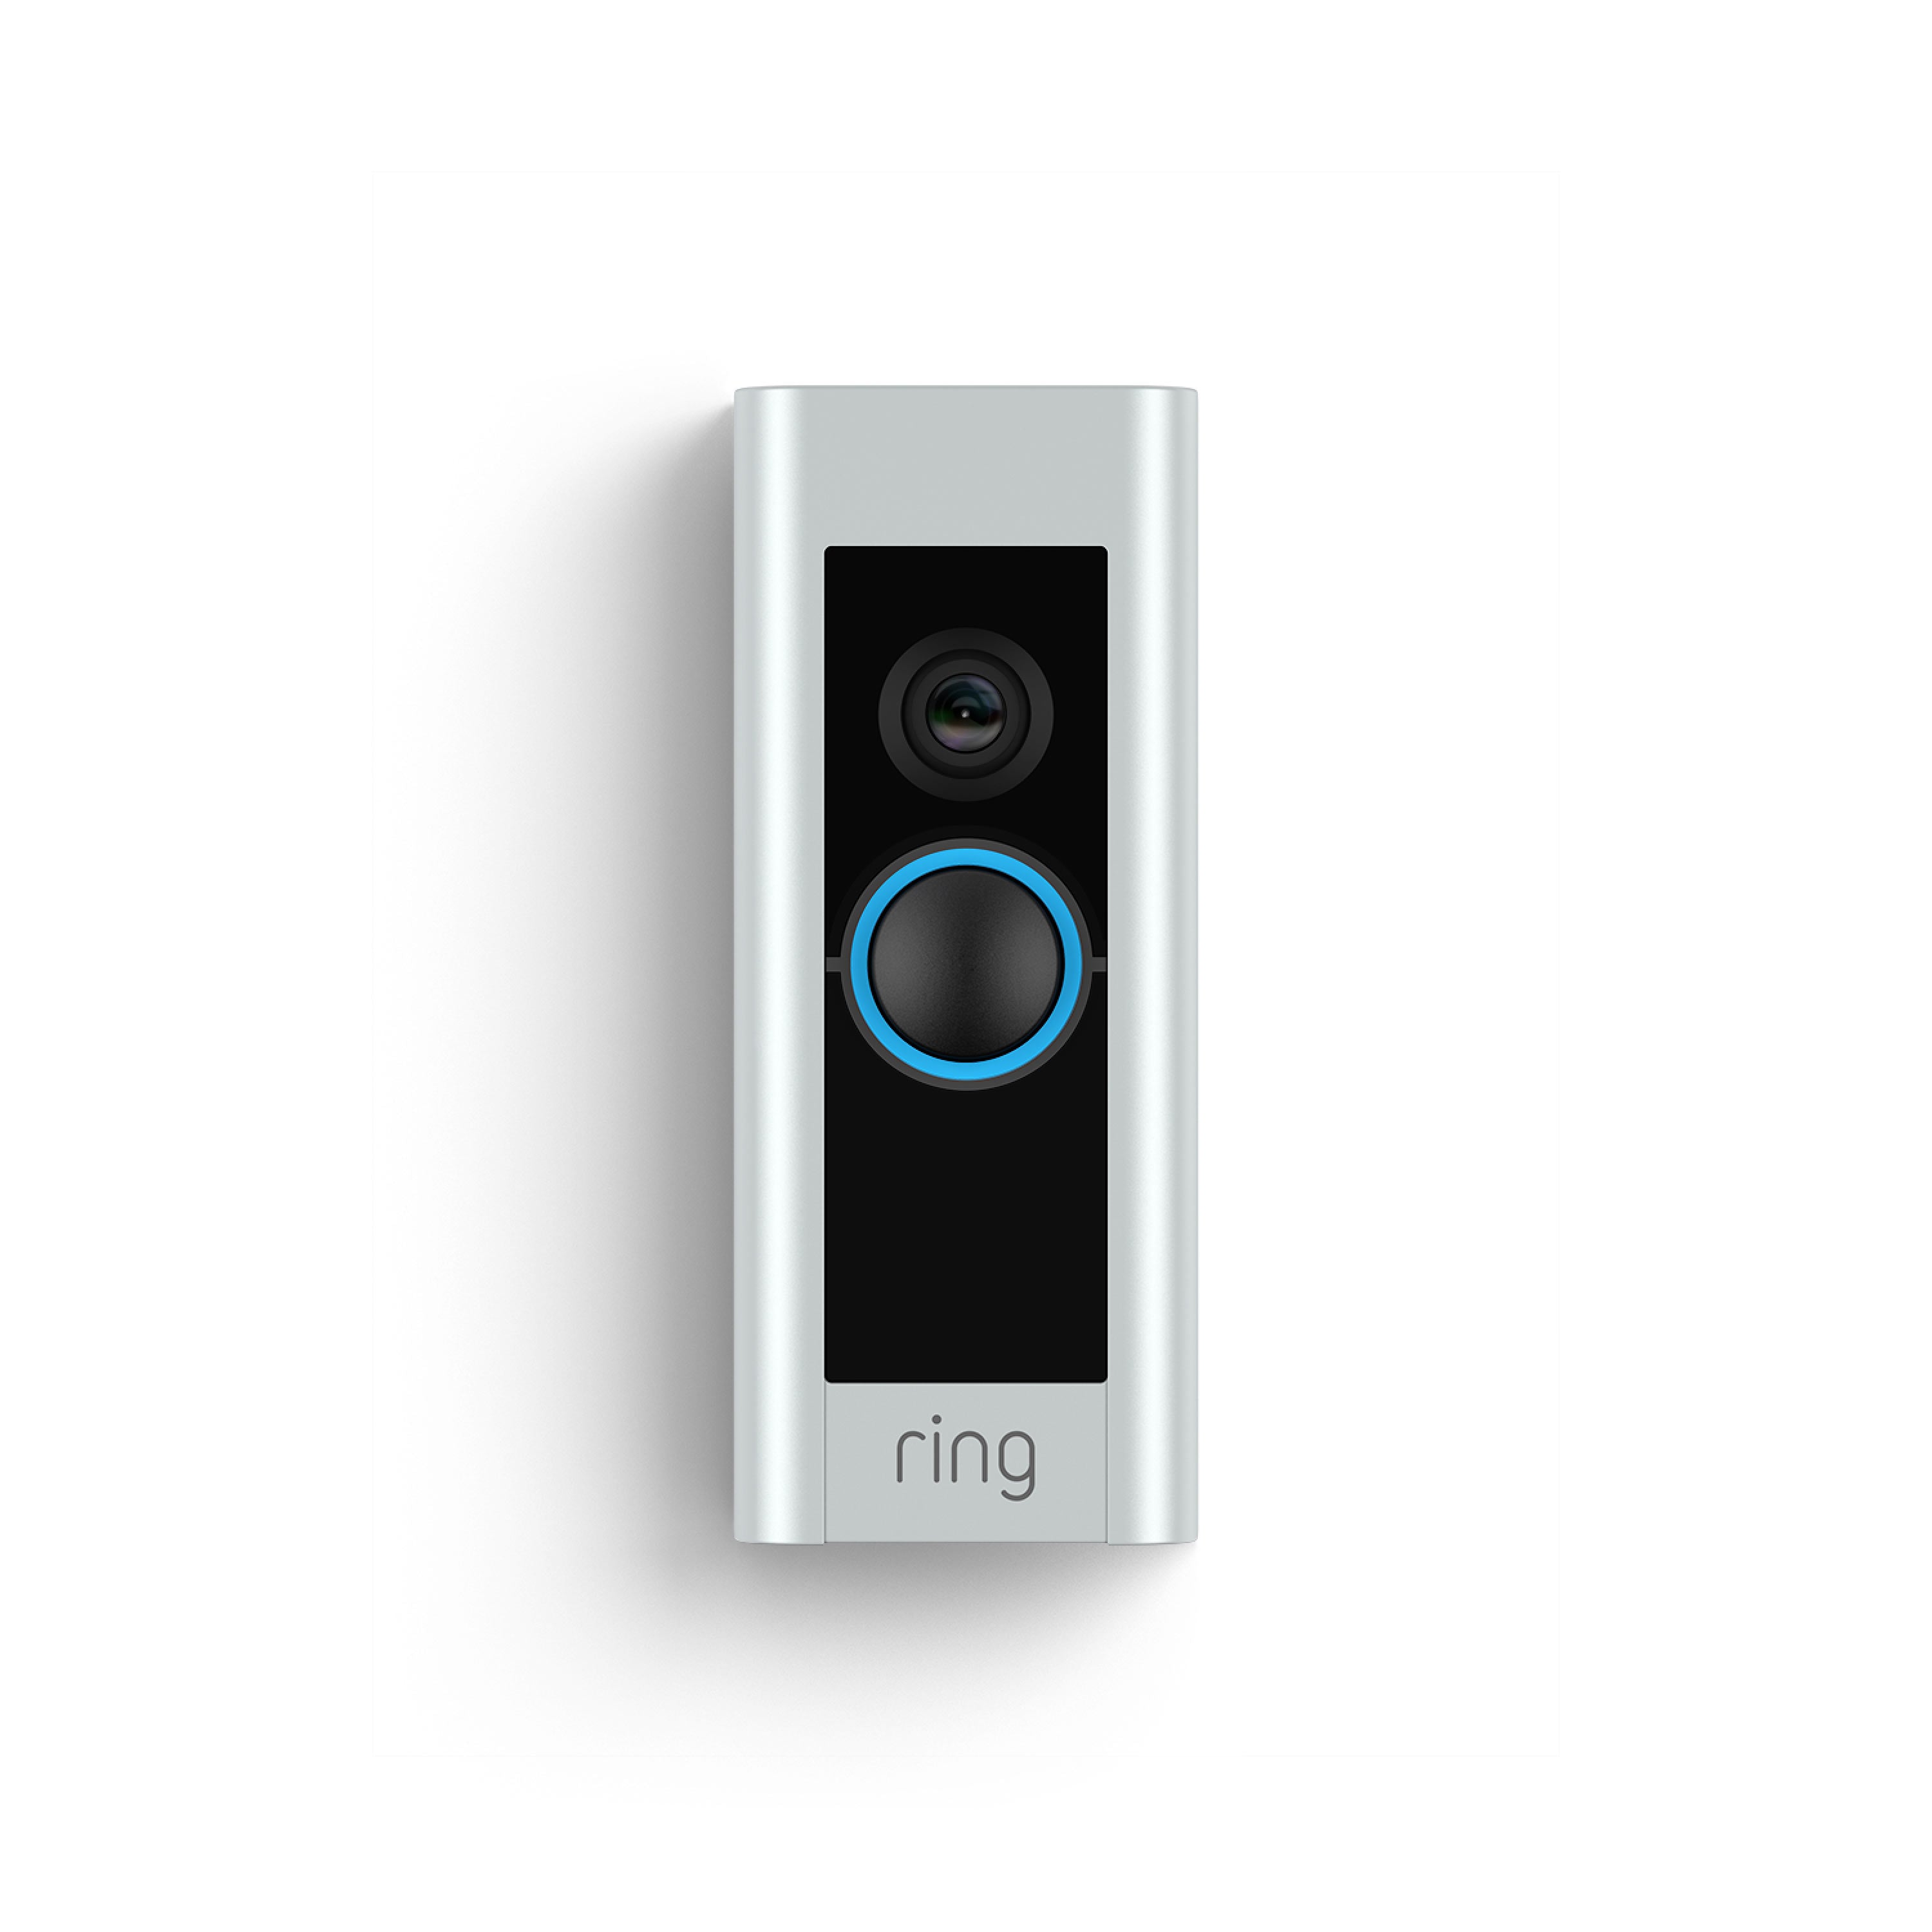 Ring Pro、Ring Video Doorbell Pro、1080p Wi-Fi HD Cam Hardwired WorksとAlexaRing Pro, Ring Video Doorbell Pro, 1080P Wi-Fi HD Cam